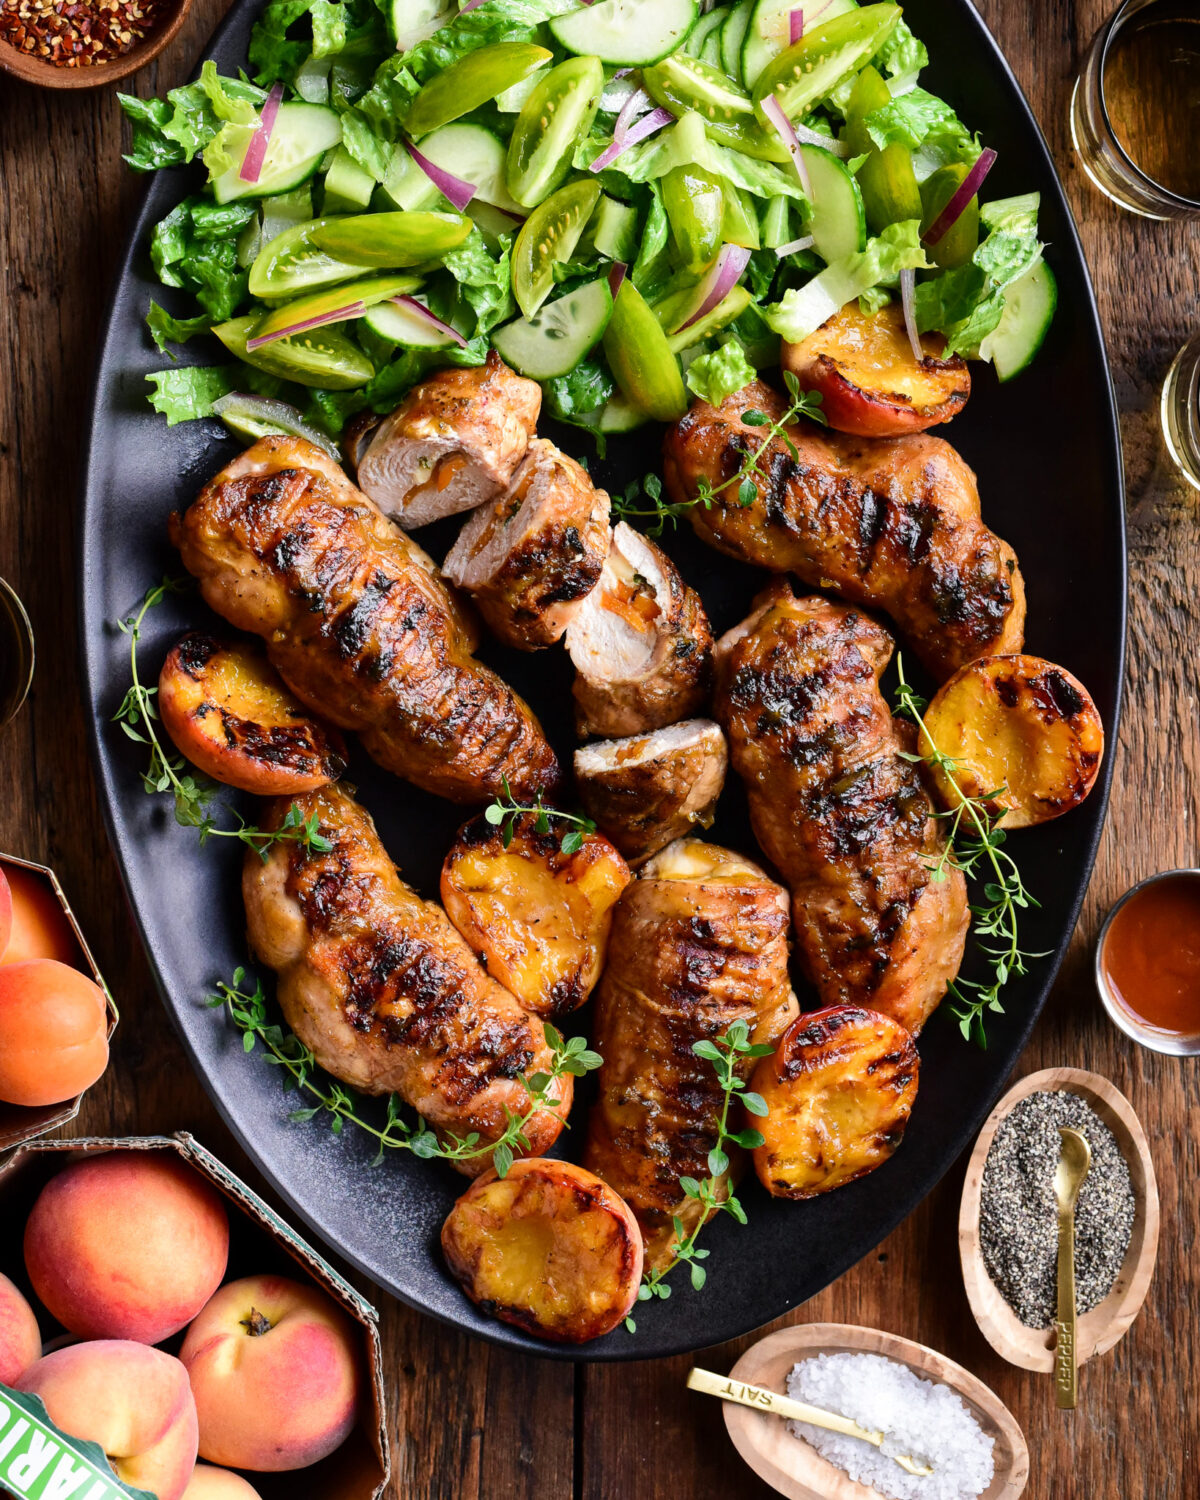 A large platter of (Stuffed) Chicken Breasts with Peach BBQ Sauce and a green salad.